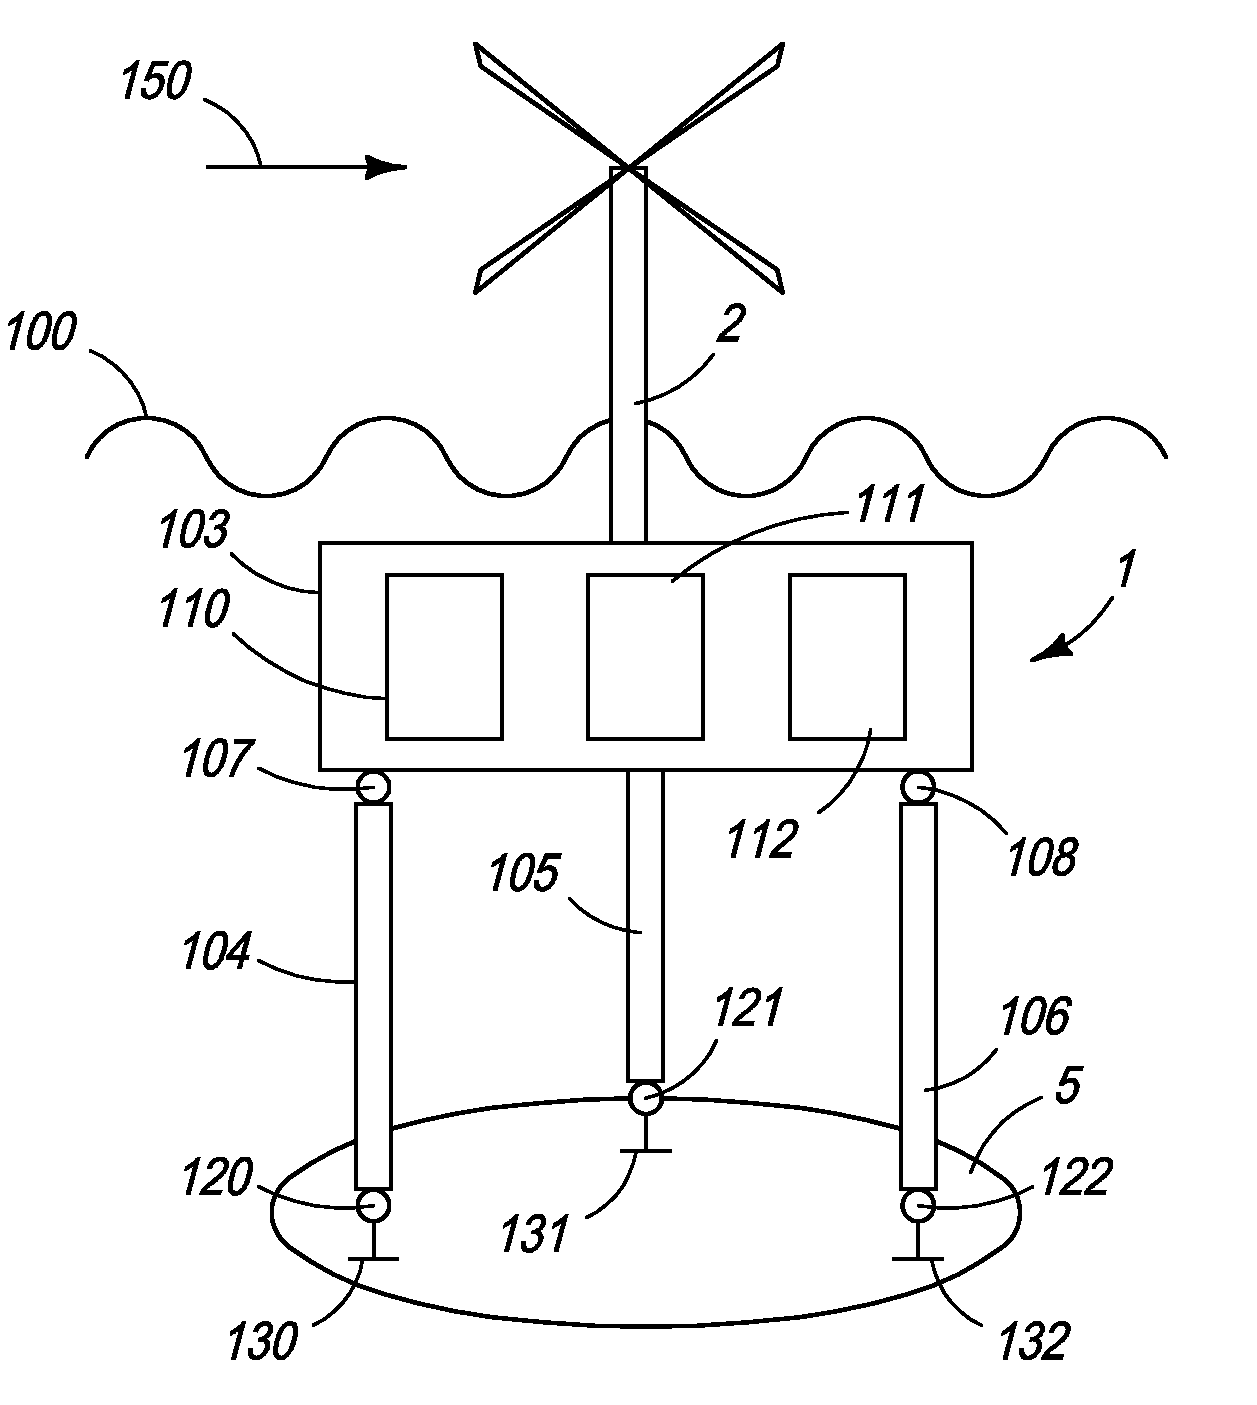 System for mounting equipment and structures offshore